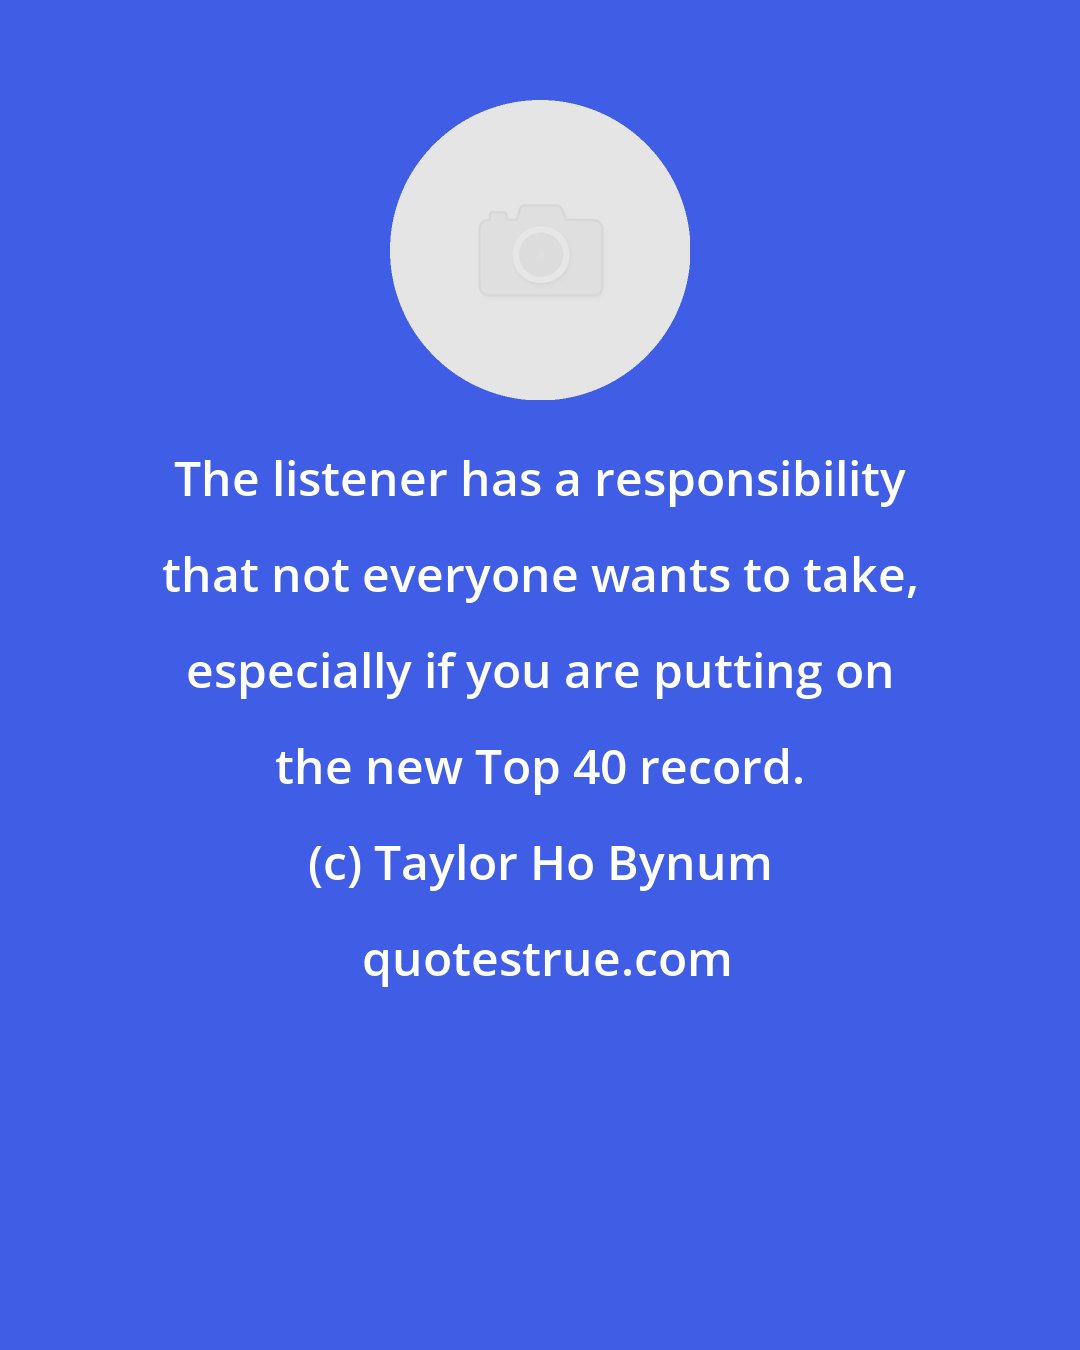 Taylor Ho Bynum: The listener has a responsibility that not everyone wants to take, especially if you are putting on the new Top 40 record.